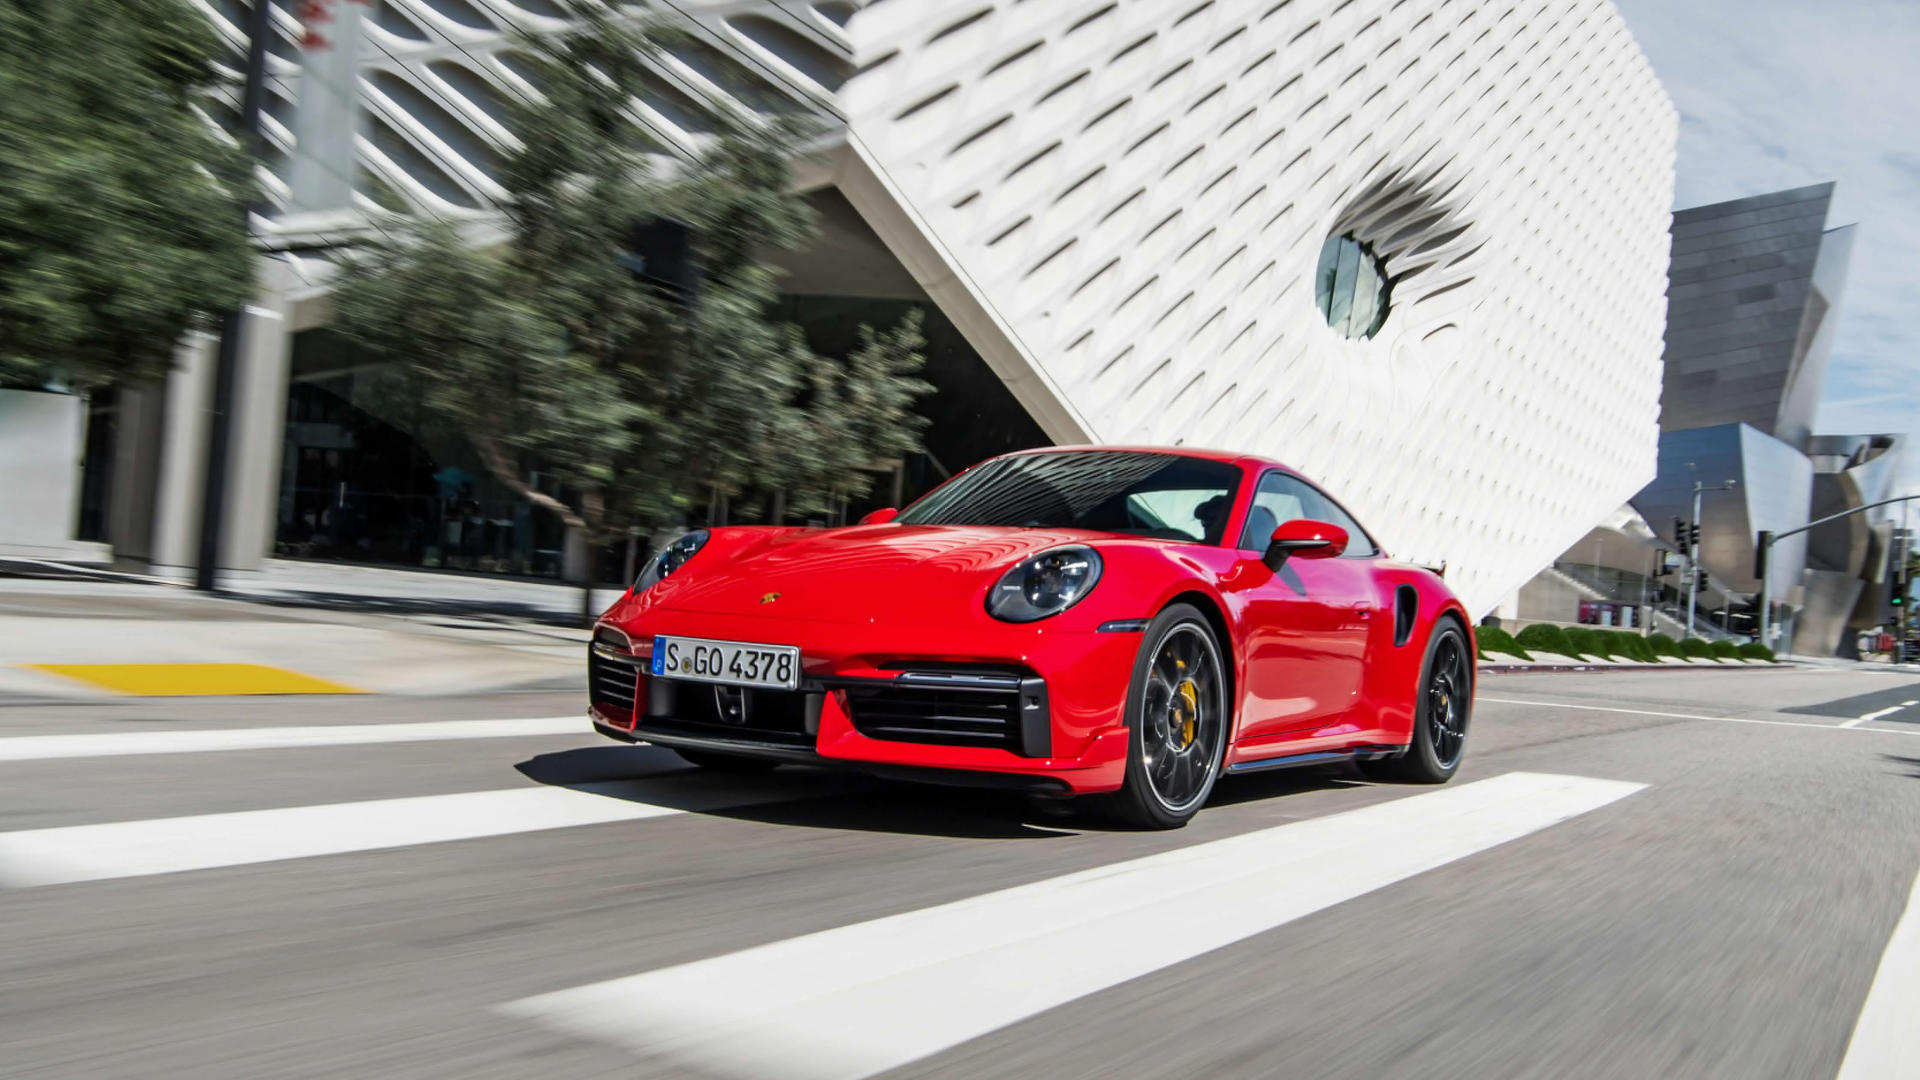 The All-New 2021 Porsche 911 Turbo S Is Set To Raise The Bar